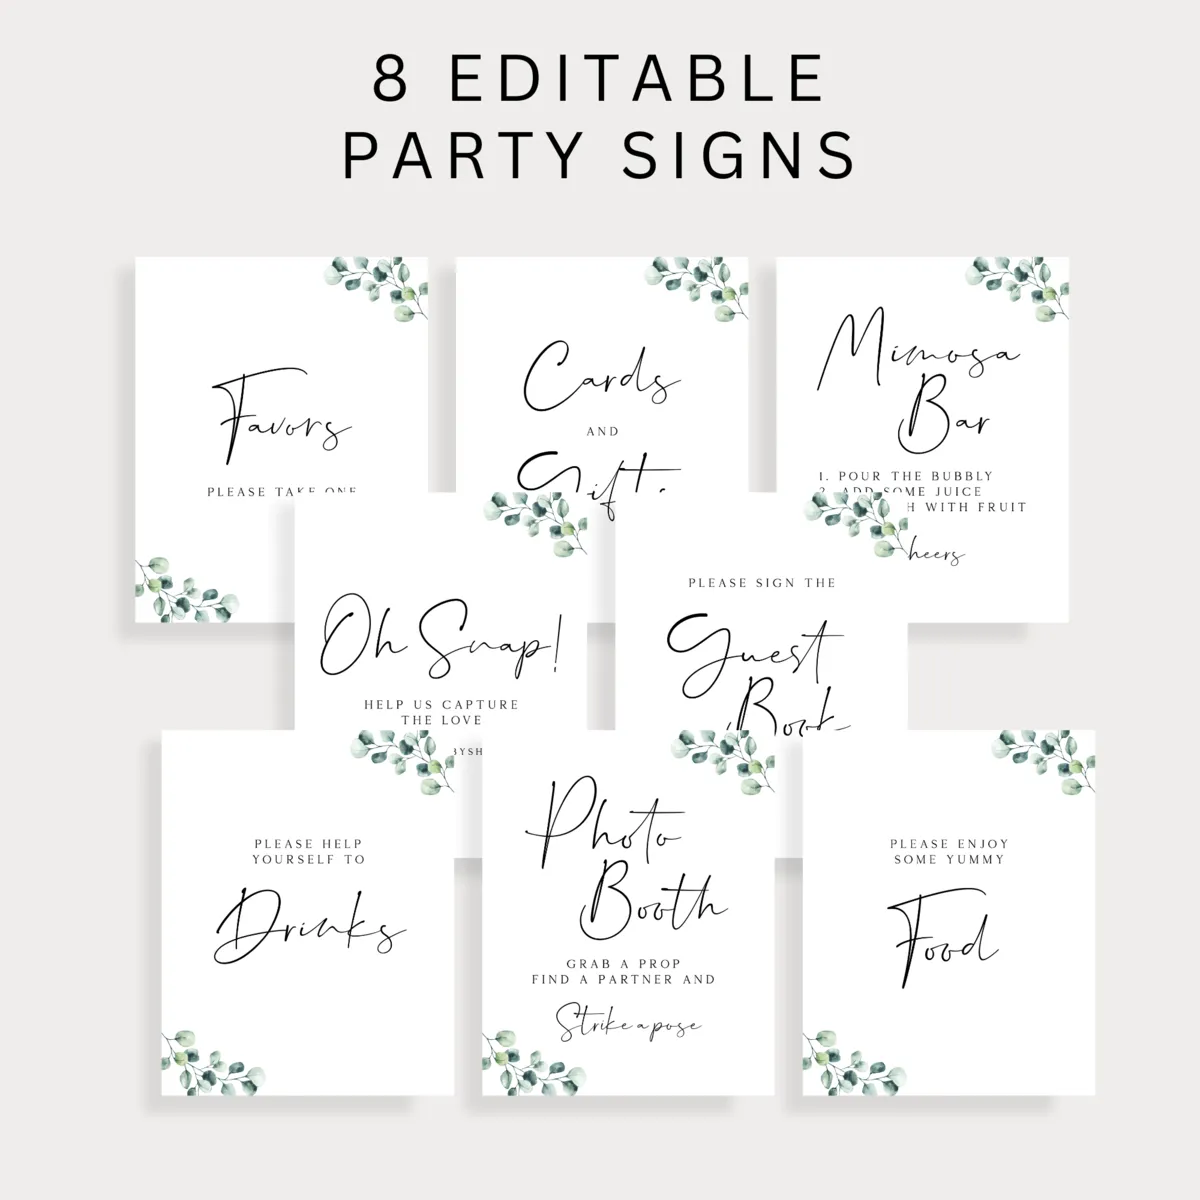 Eucalyptus Party Signs Bundle with 8 Editable Templates 